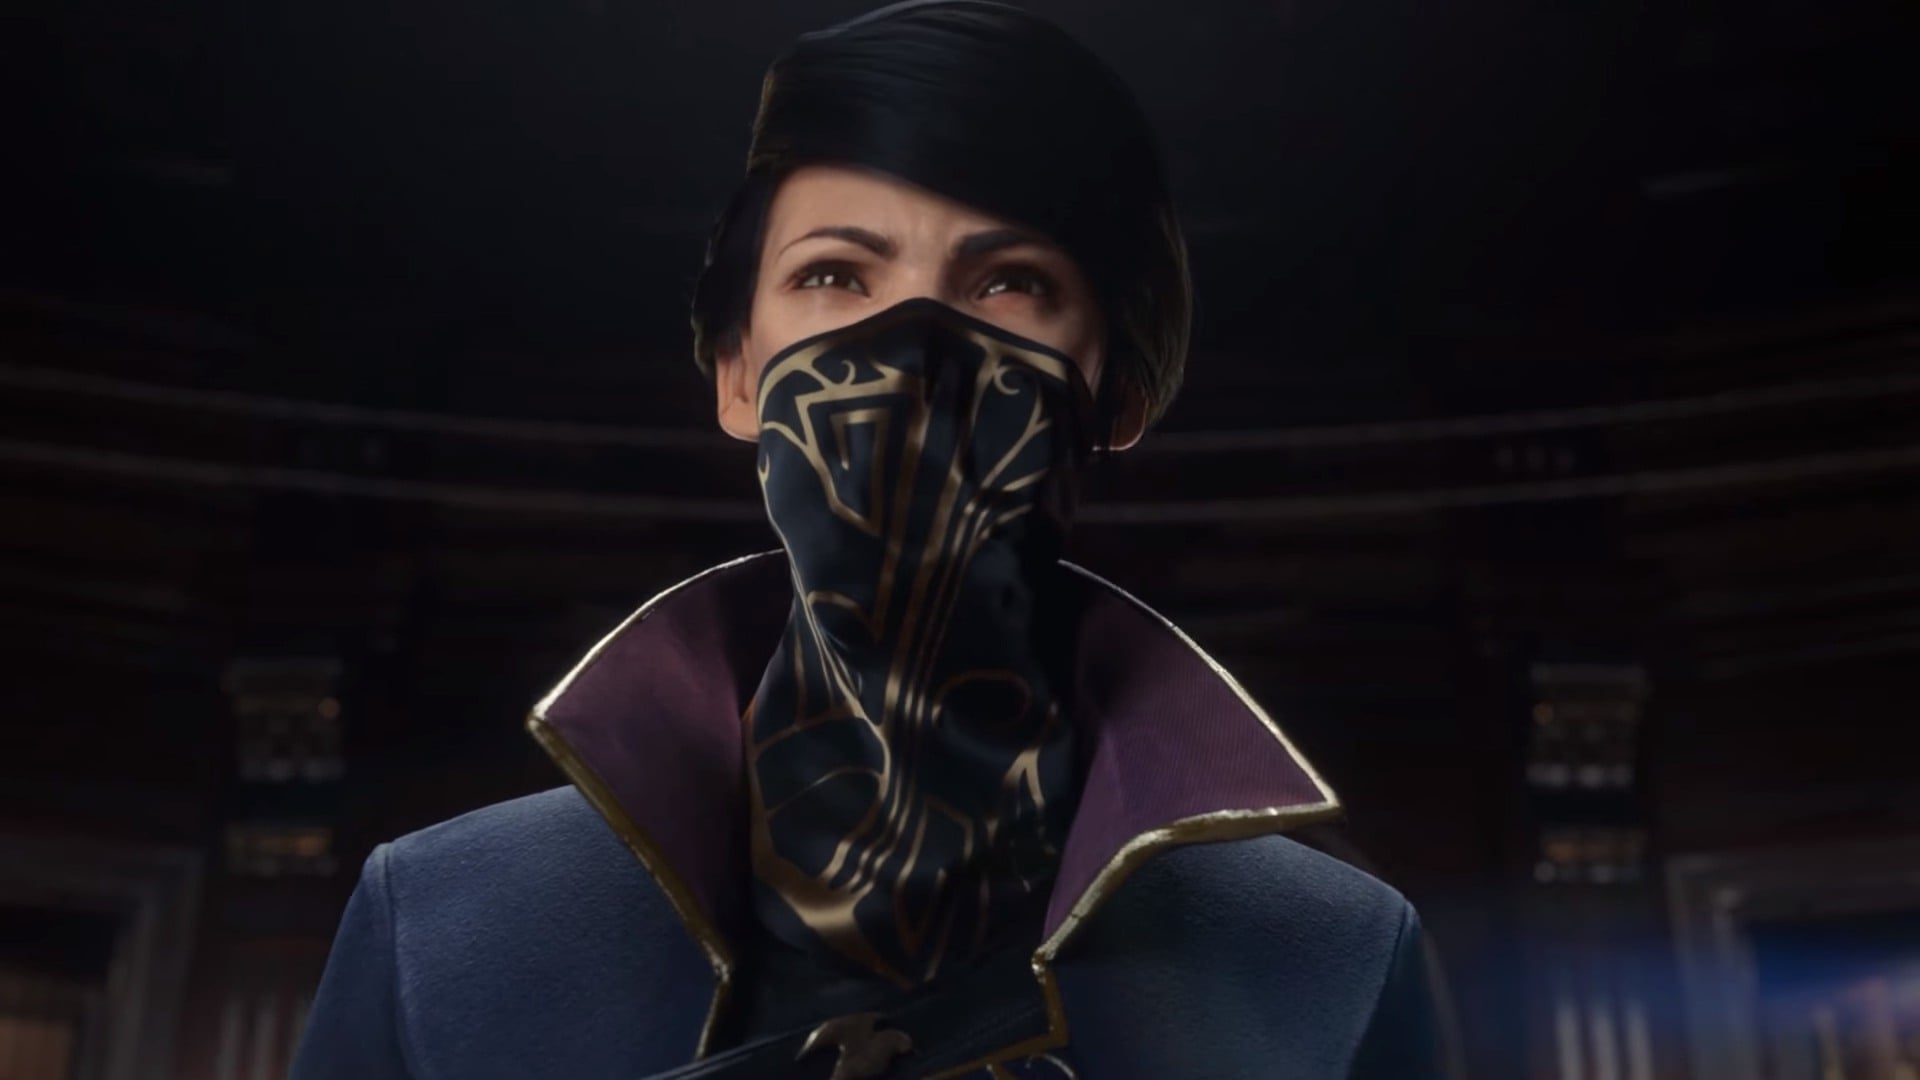 Dishonored 2 trailer shows Emily not in a killing mood